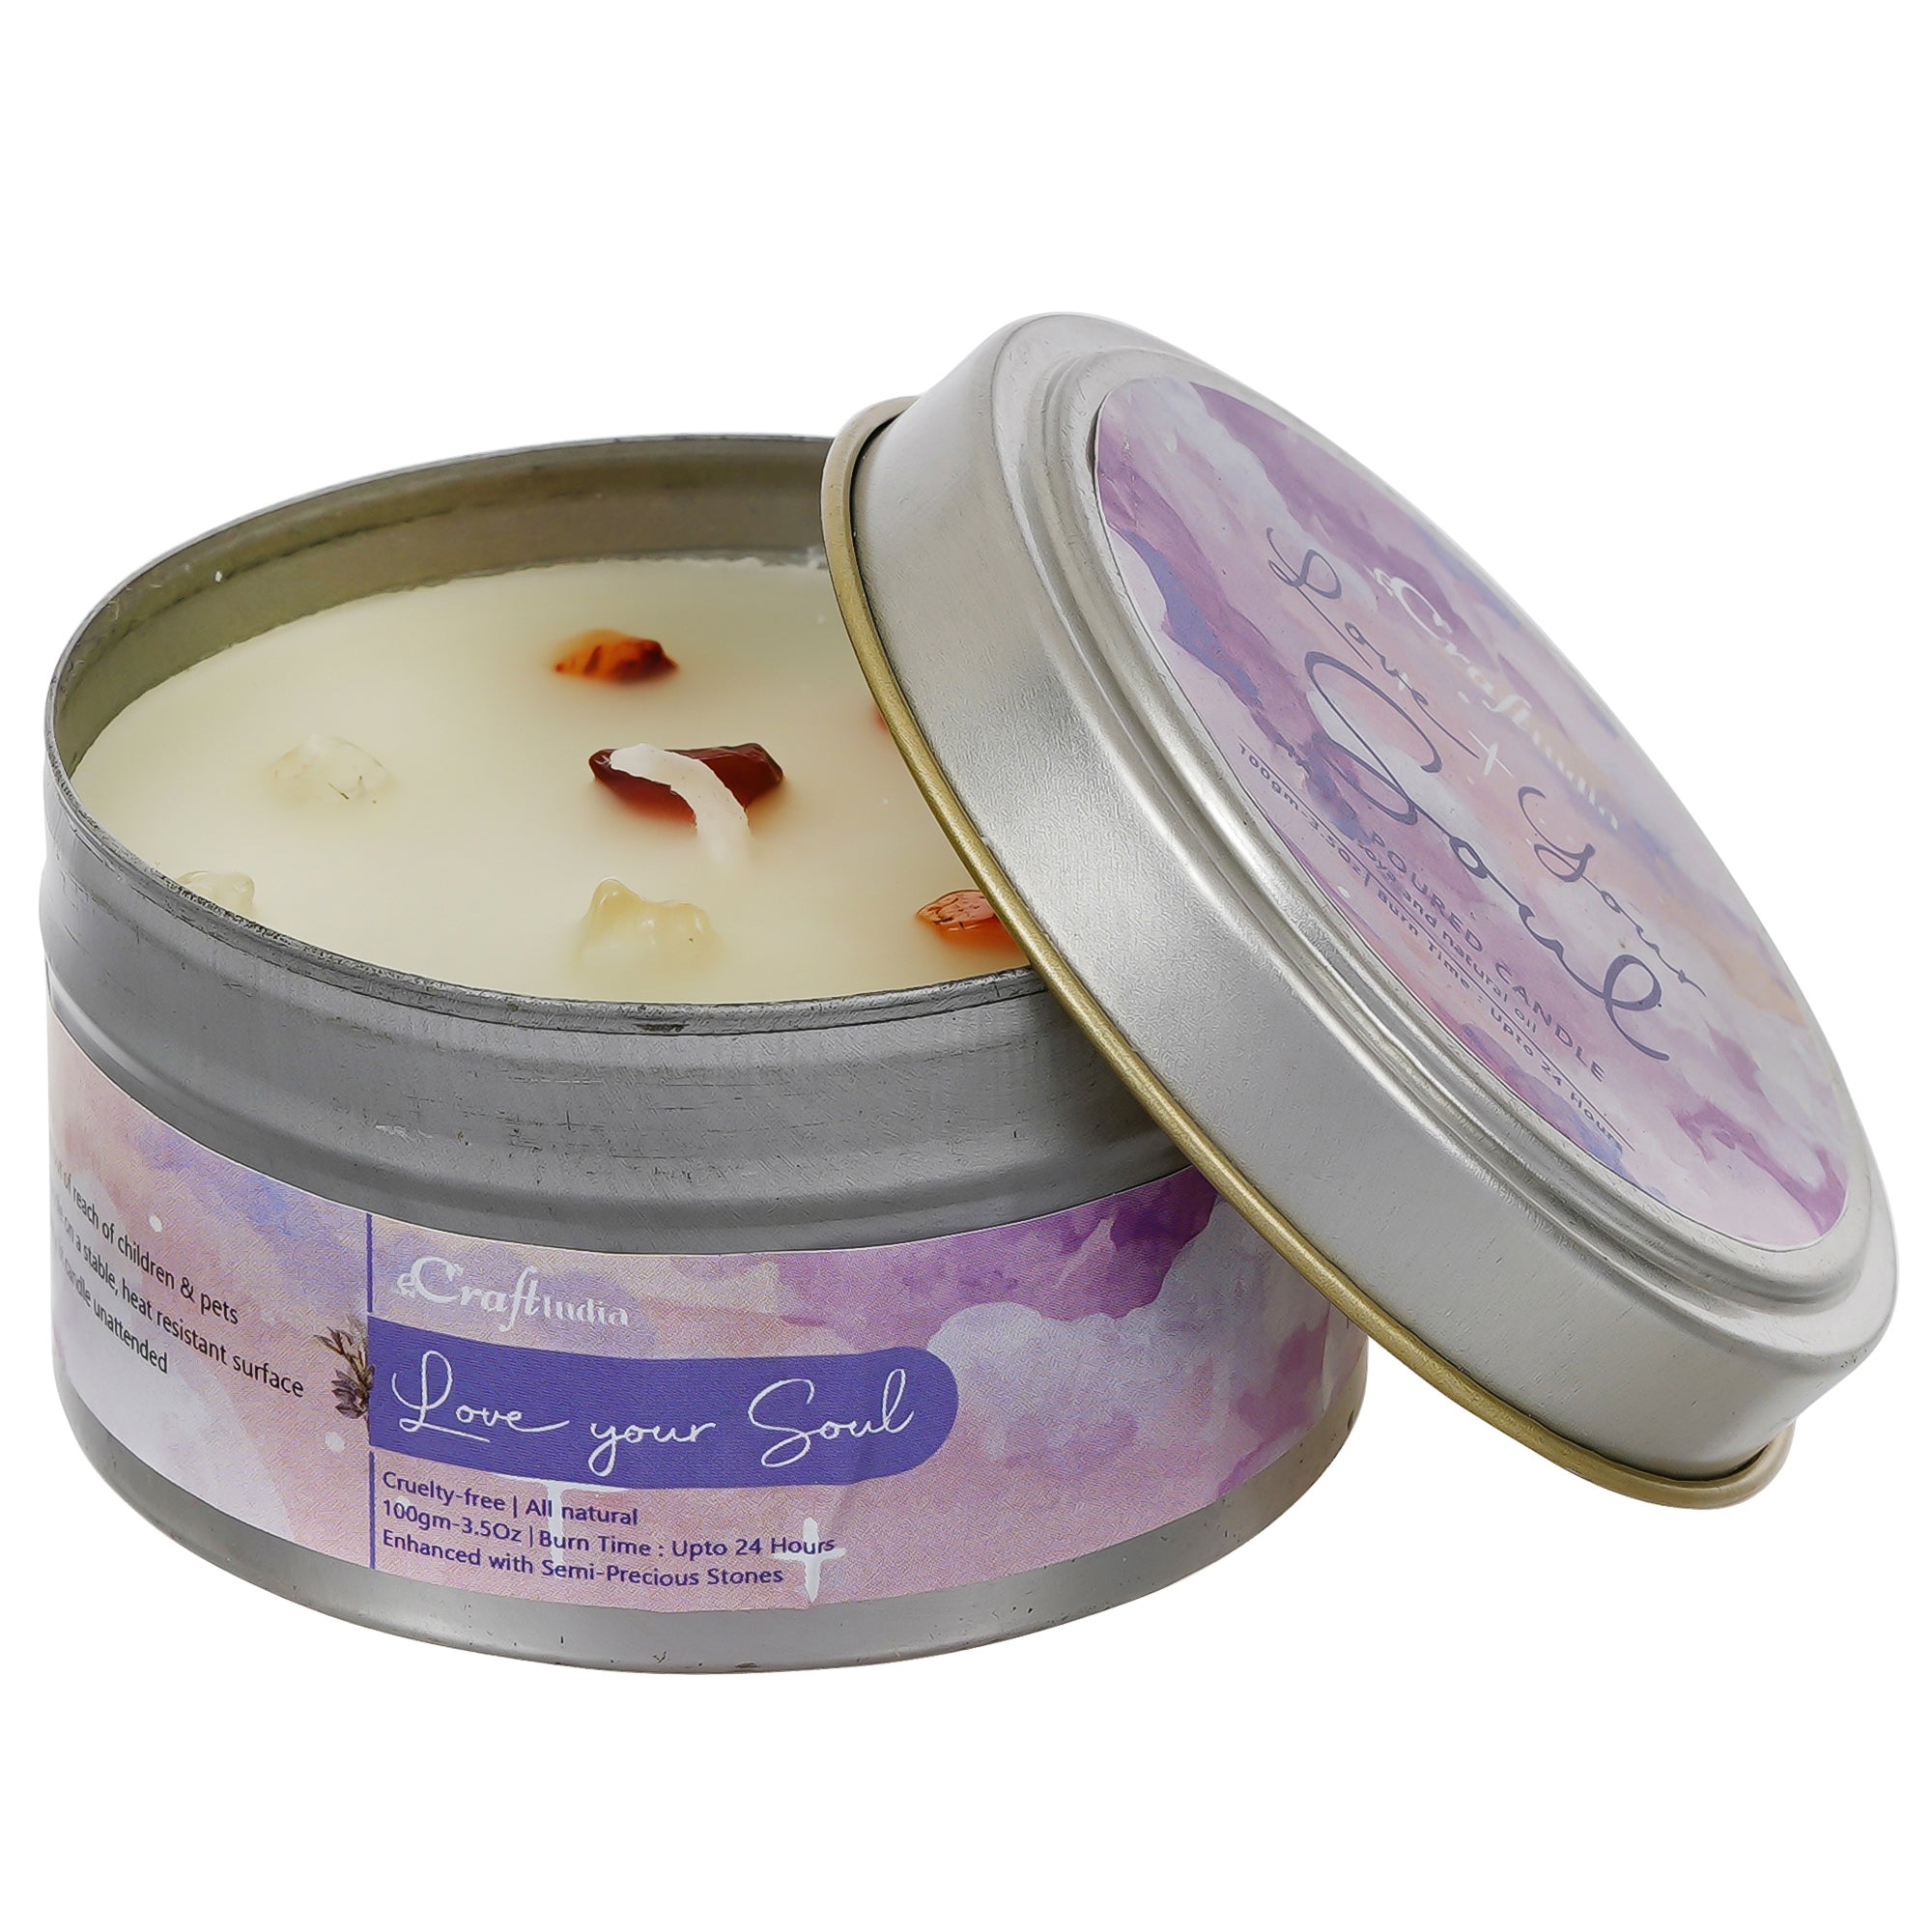 Love Your Soul Hand Poured Soya Wax Candle (100 Gm, burn time up to 24 hrs) 2